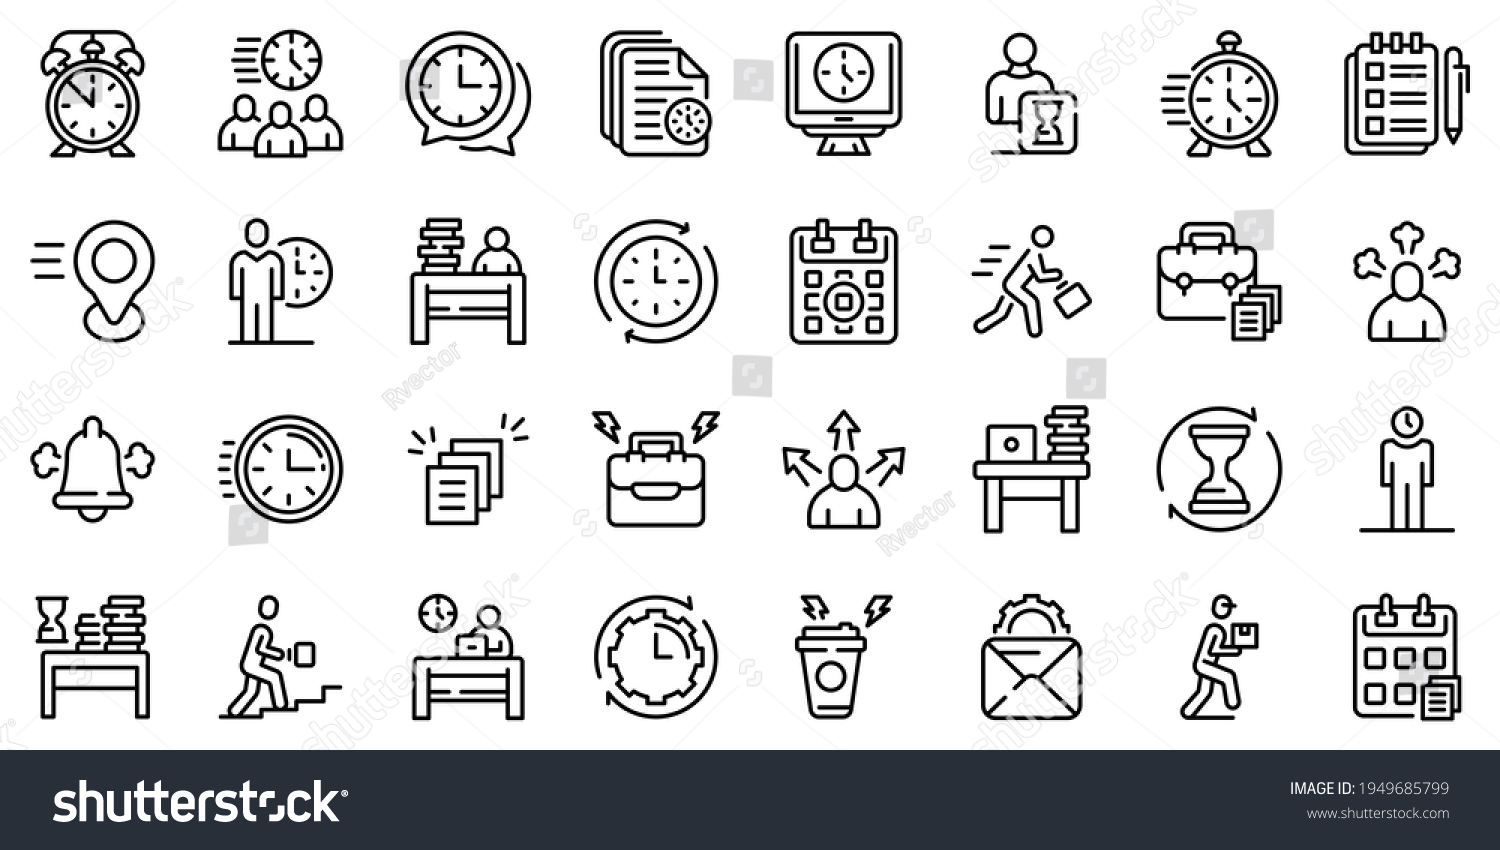 Rush job icons set. Outline set of rush job vector icons for web design isolated on white background #1949685799